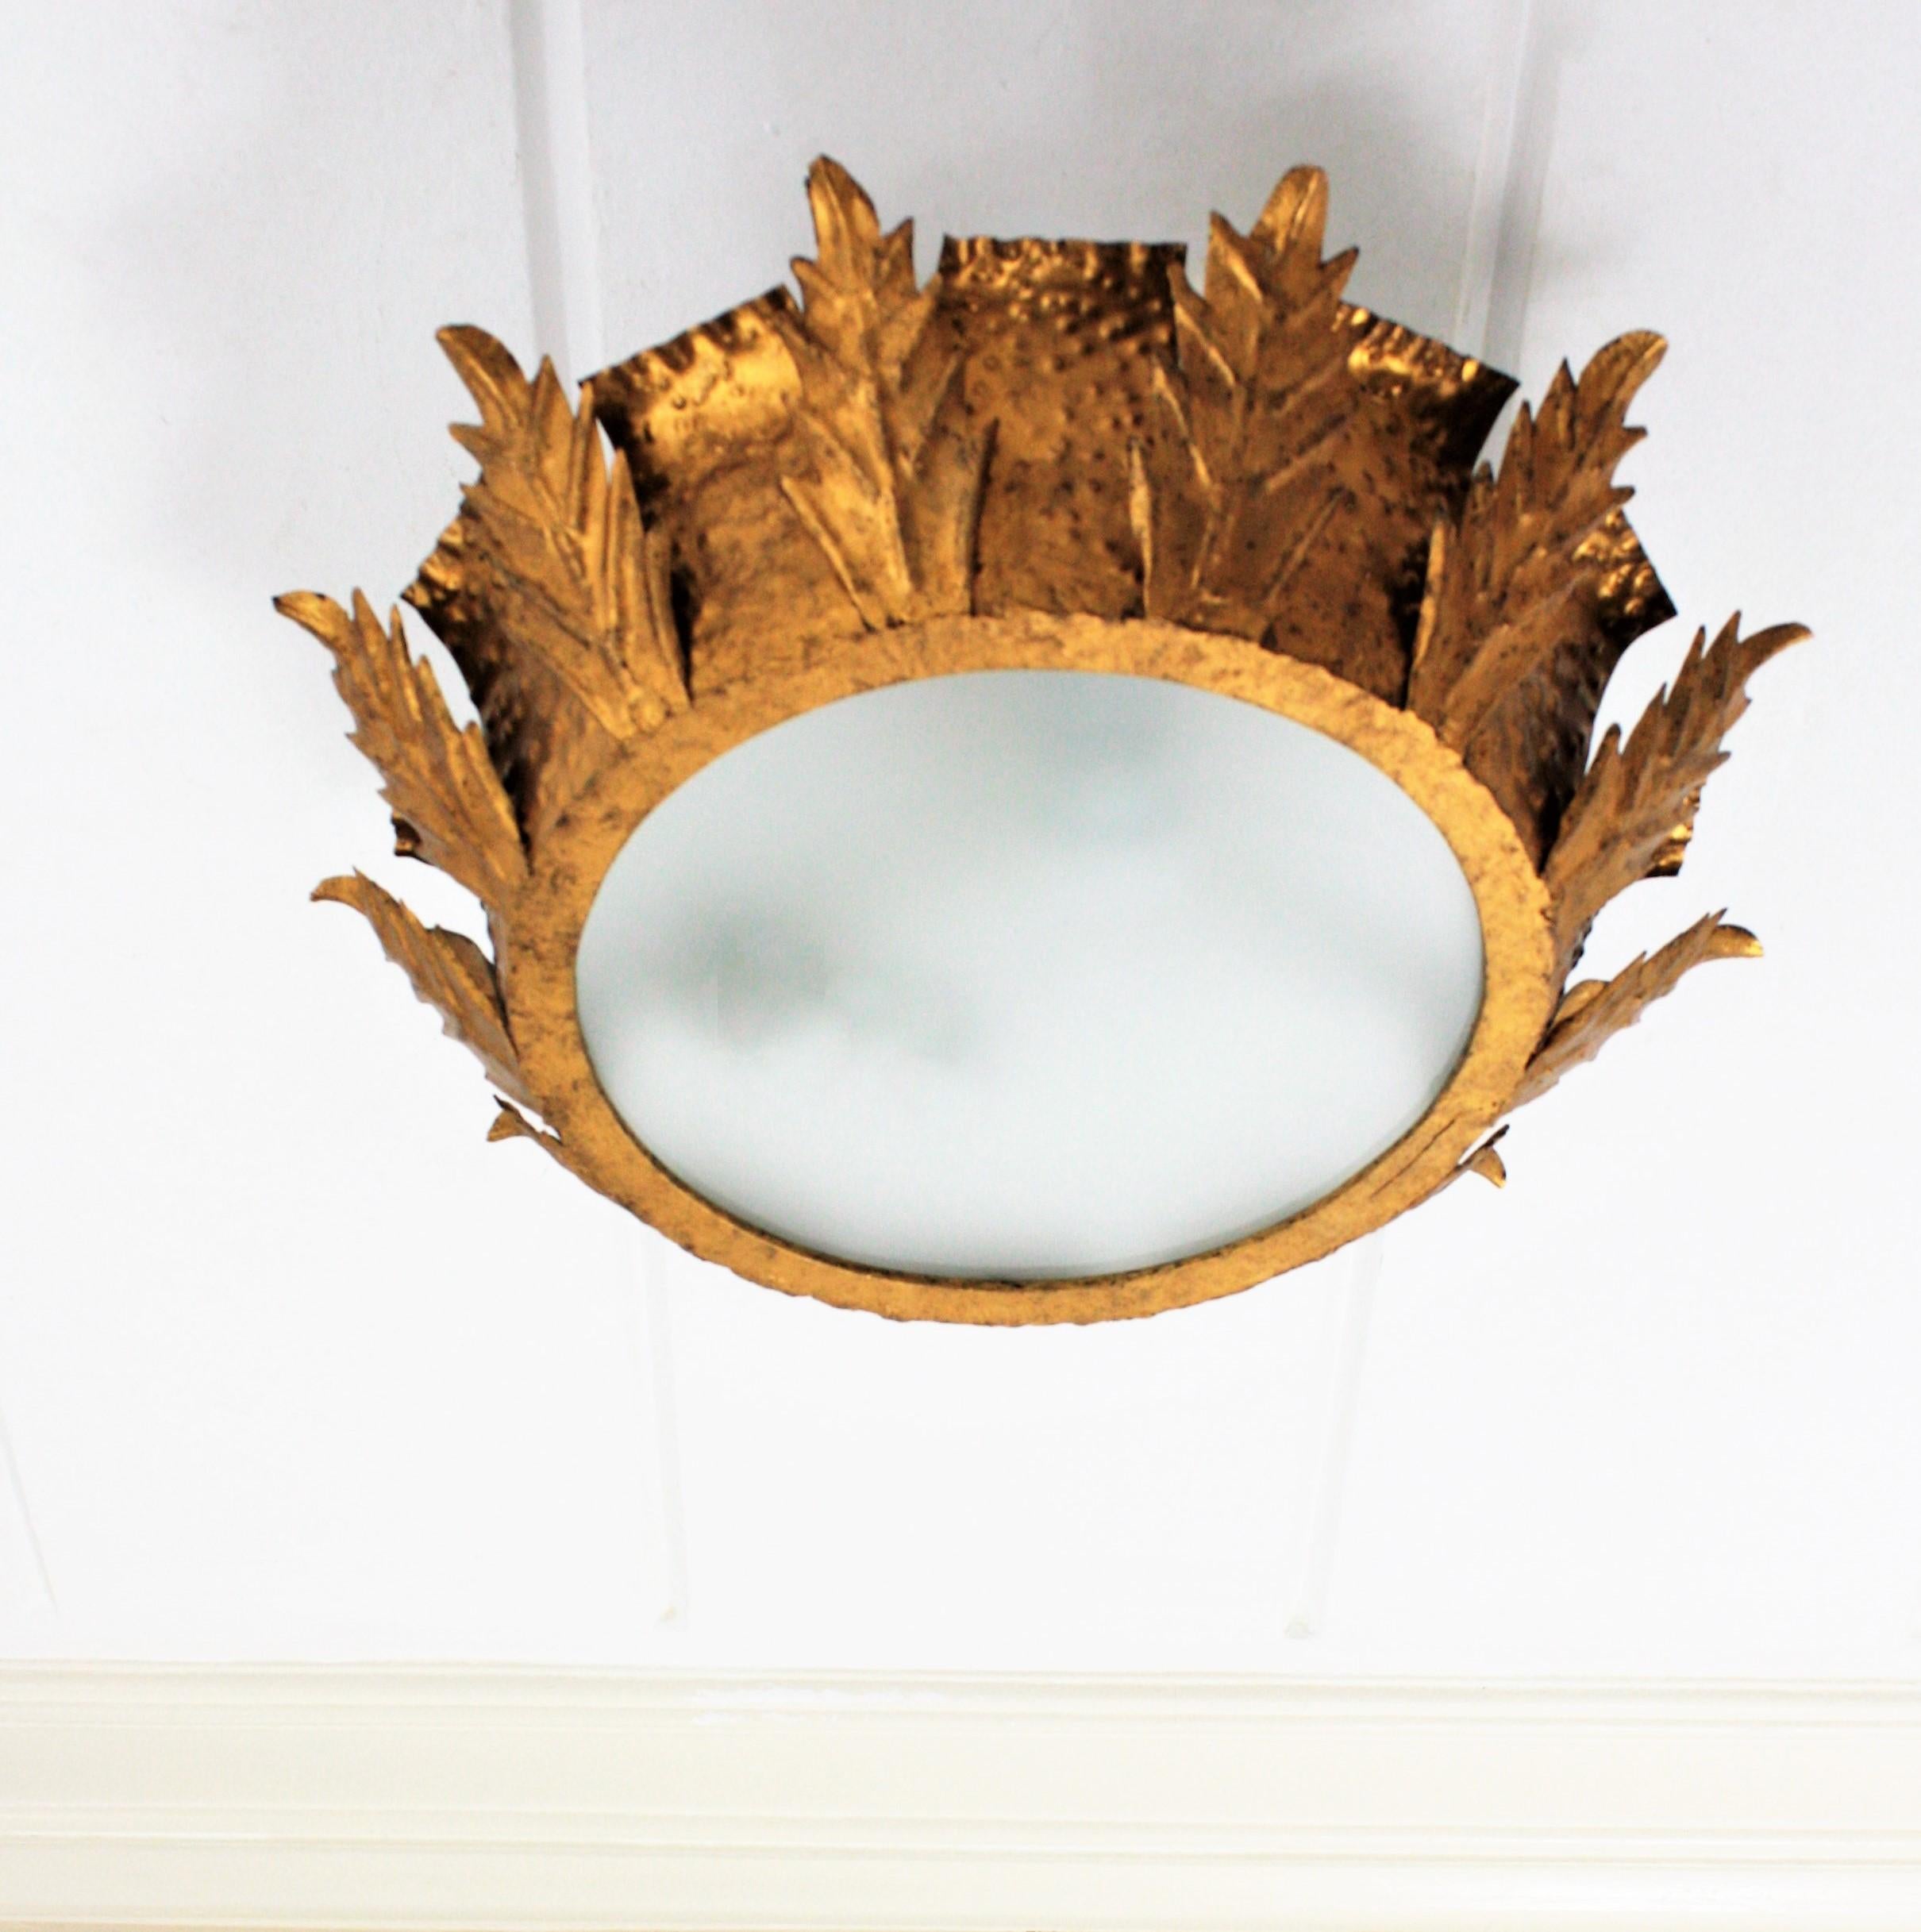 20th Century Brutalist Crown Sunburst Ceiling Light Fixture in Gilt Iron & Frosted Glass